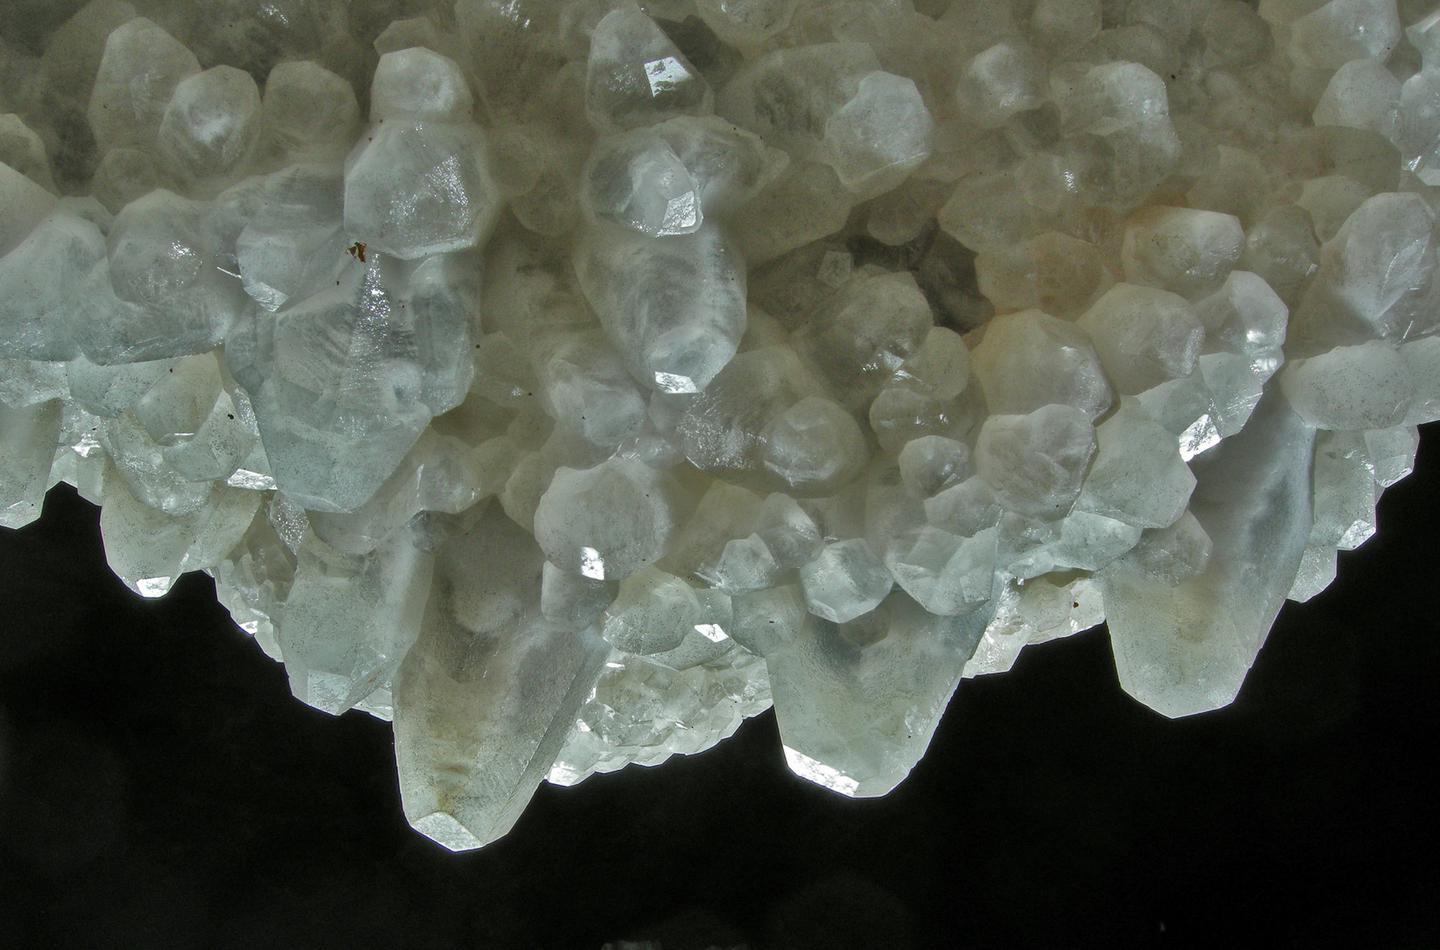 Nailhead SparCalcite crystals, such as nailhead spar, cover most of the walls, ceilings, and floors within Jewel Cave.